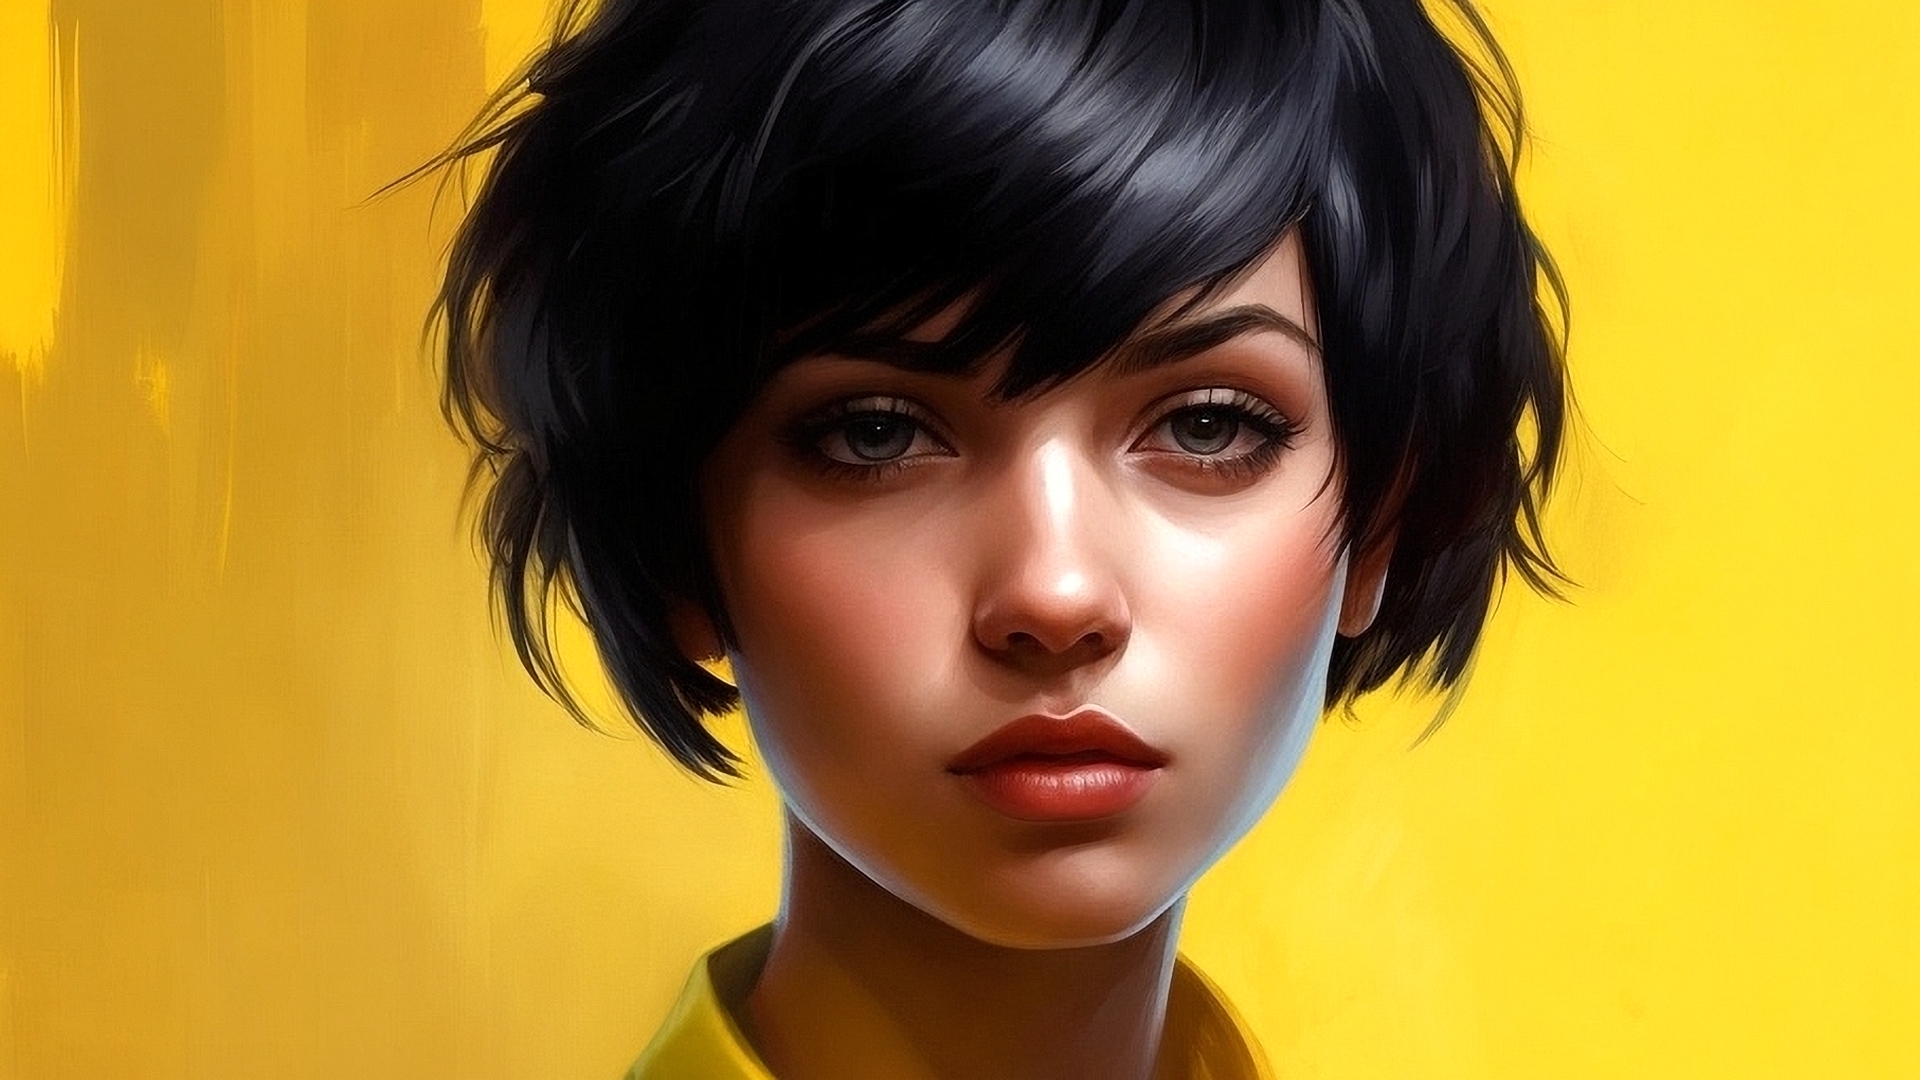 Portrait of a girl with short haircut on yellow background